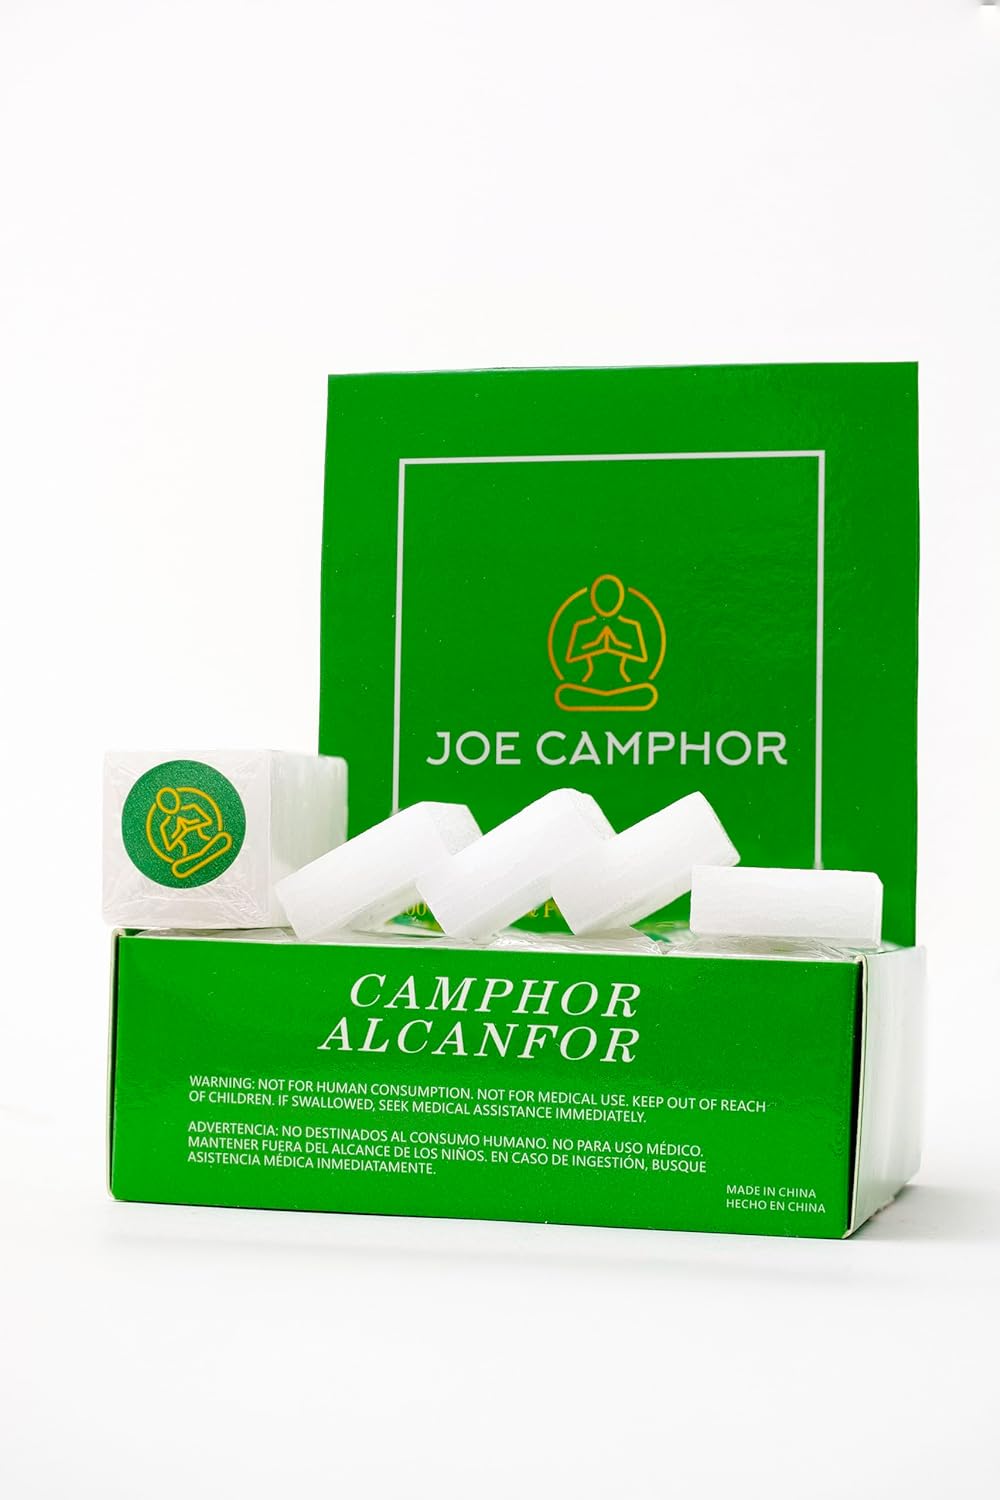 Tablets | 100% Pure & Natural Camphor Blocks (1/2 lb, 8 Ounces, 227grams, 32 Tablets) for Aromatherapy, Odor Eliminator, Puja, Kapoor, Alcanfor…